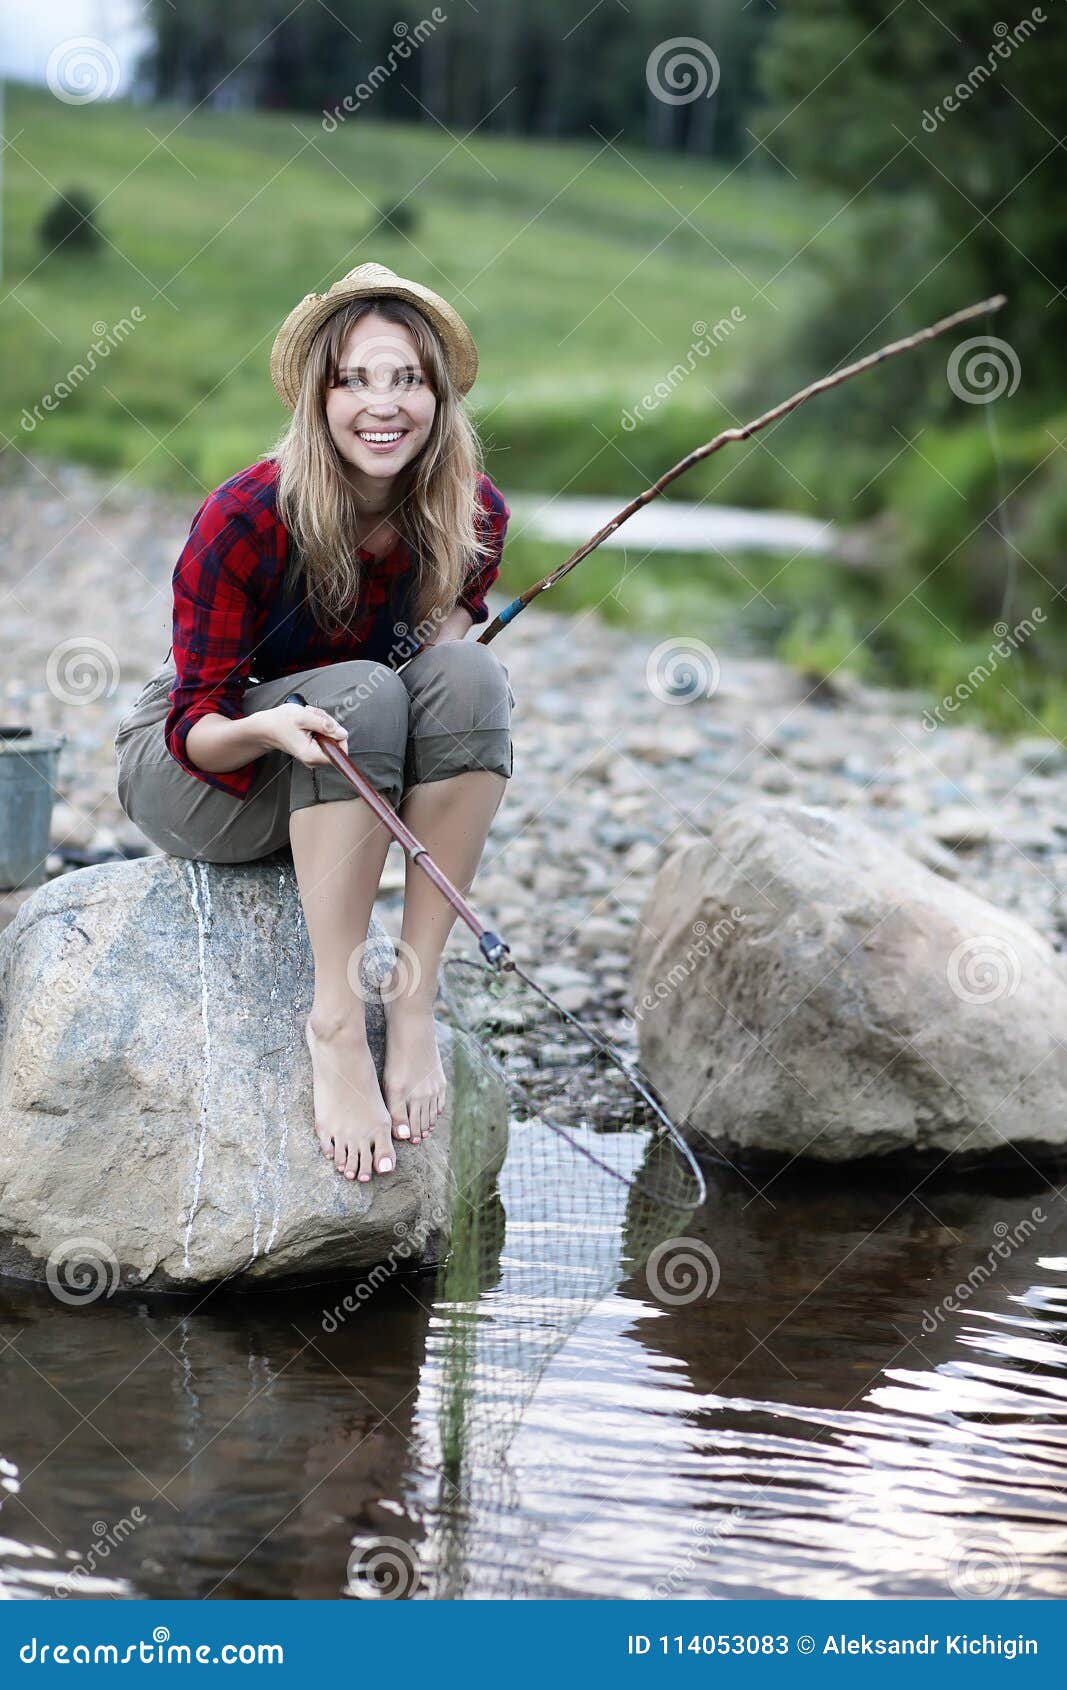 Girl by the River with a Fishing Rod Stock Image - Image of active